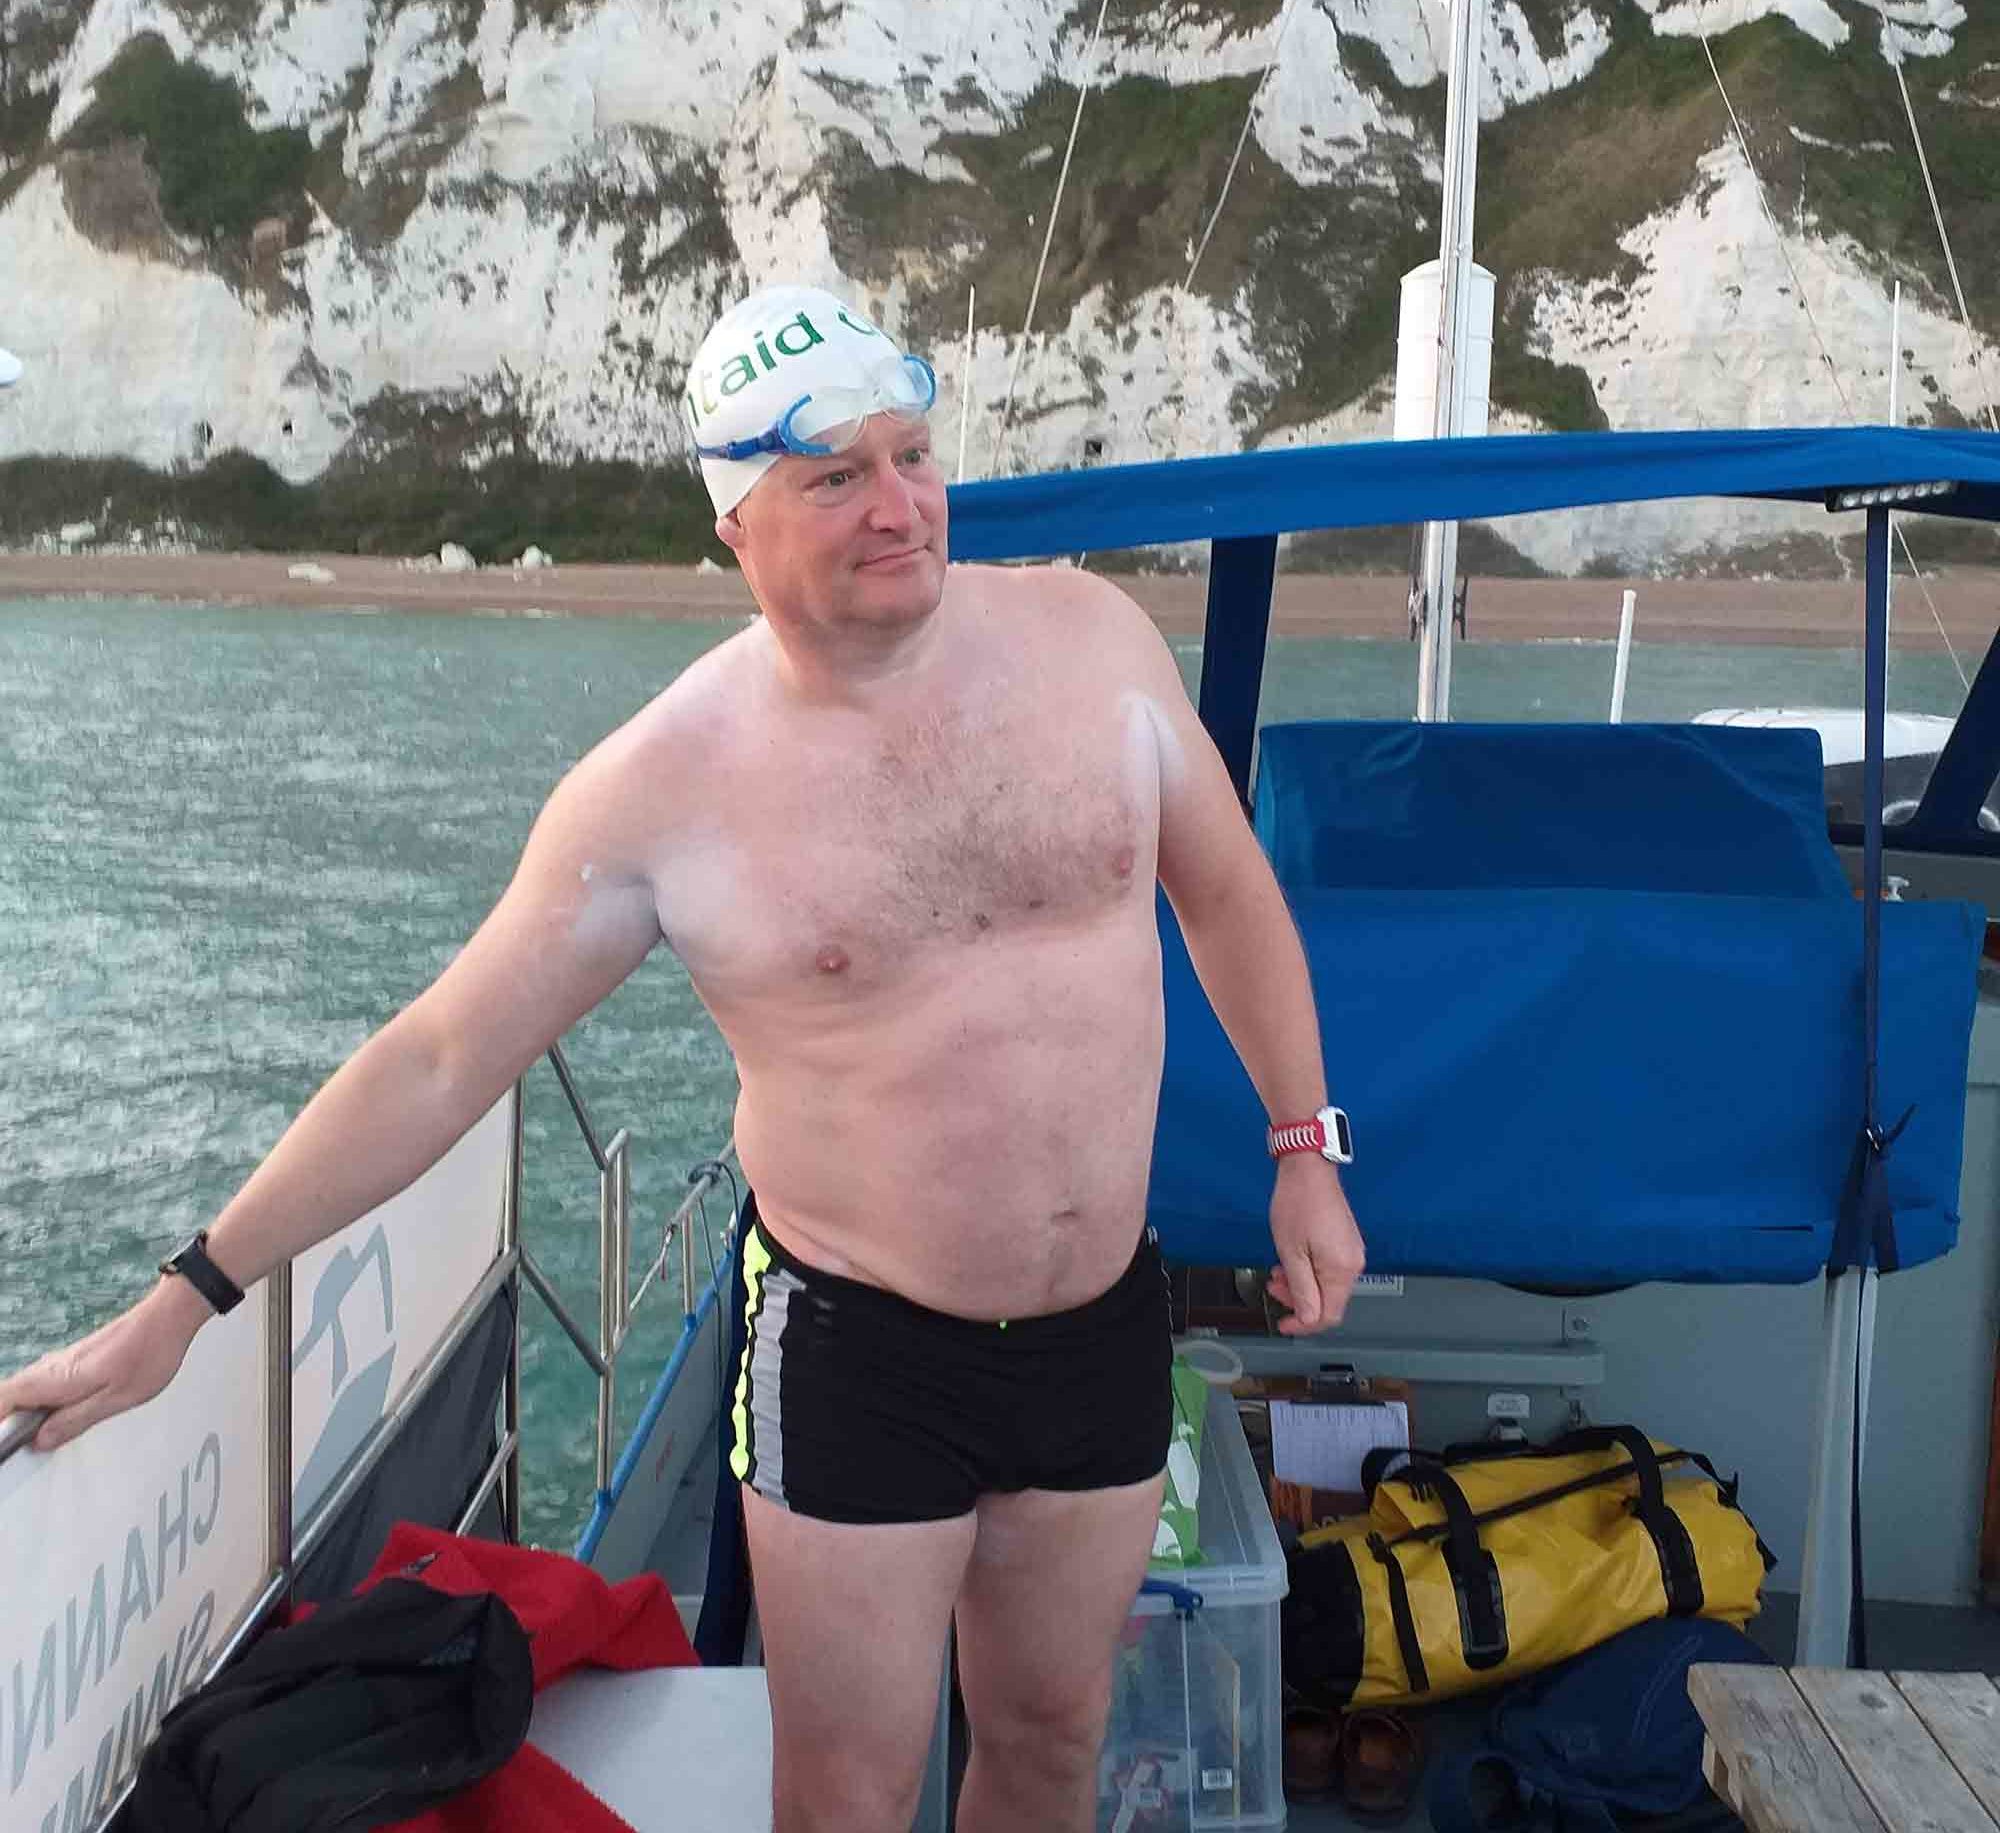 Jim Lafferty completed a solo swim across the English Channel